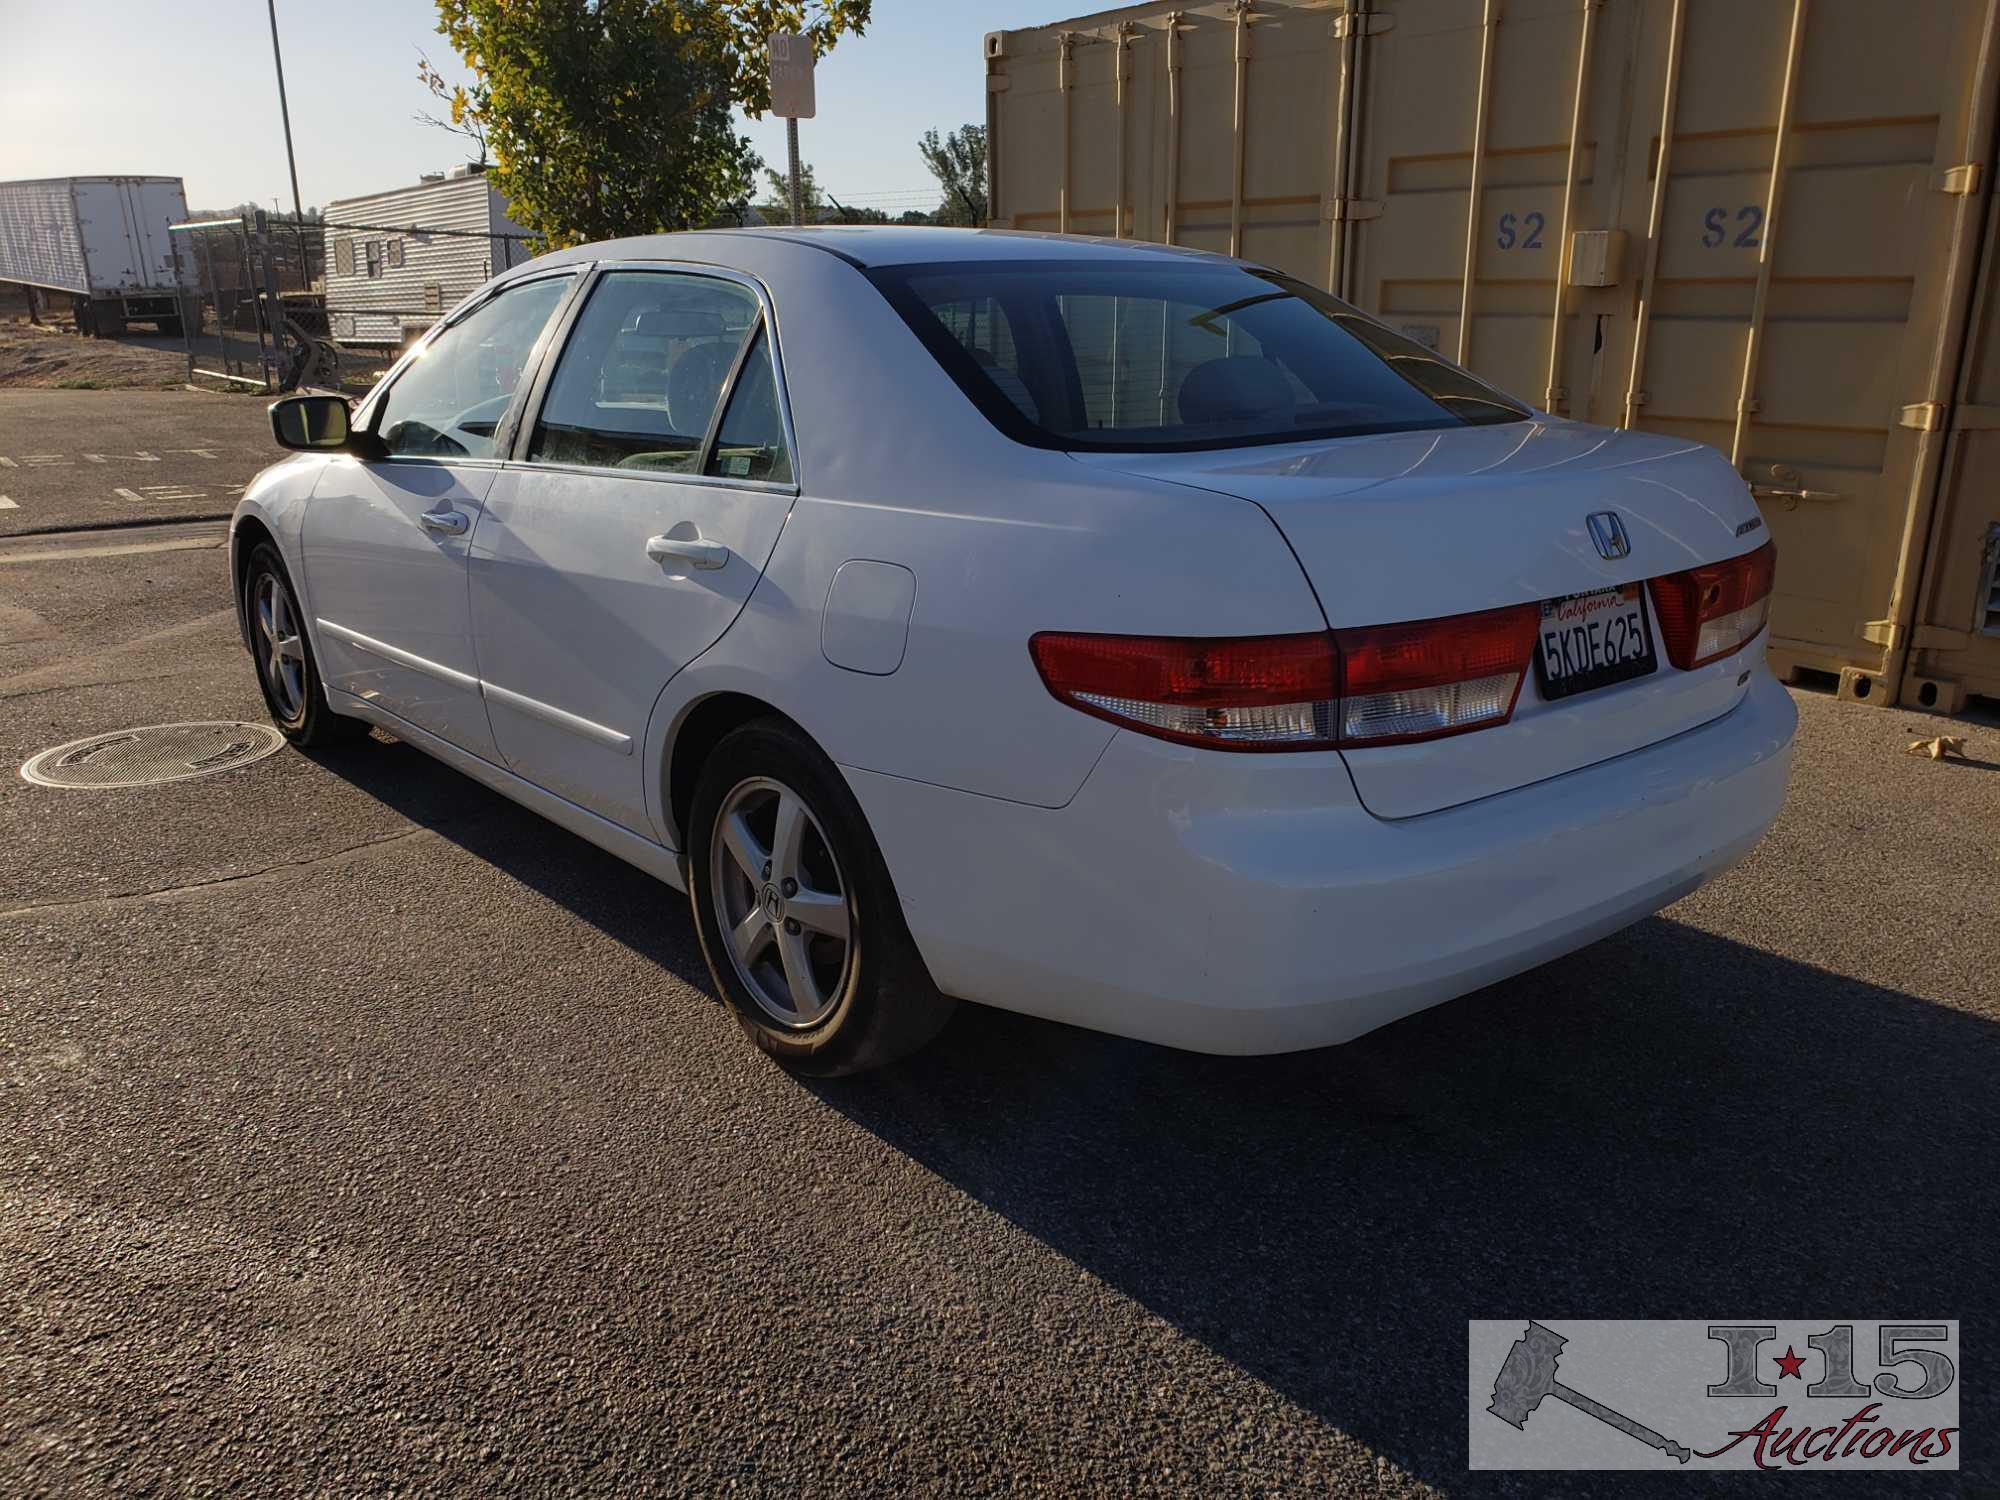 2004 Honda Accord EX White. Please See Video! Current Smog!!